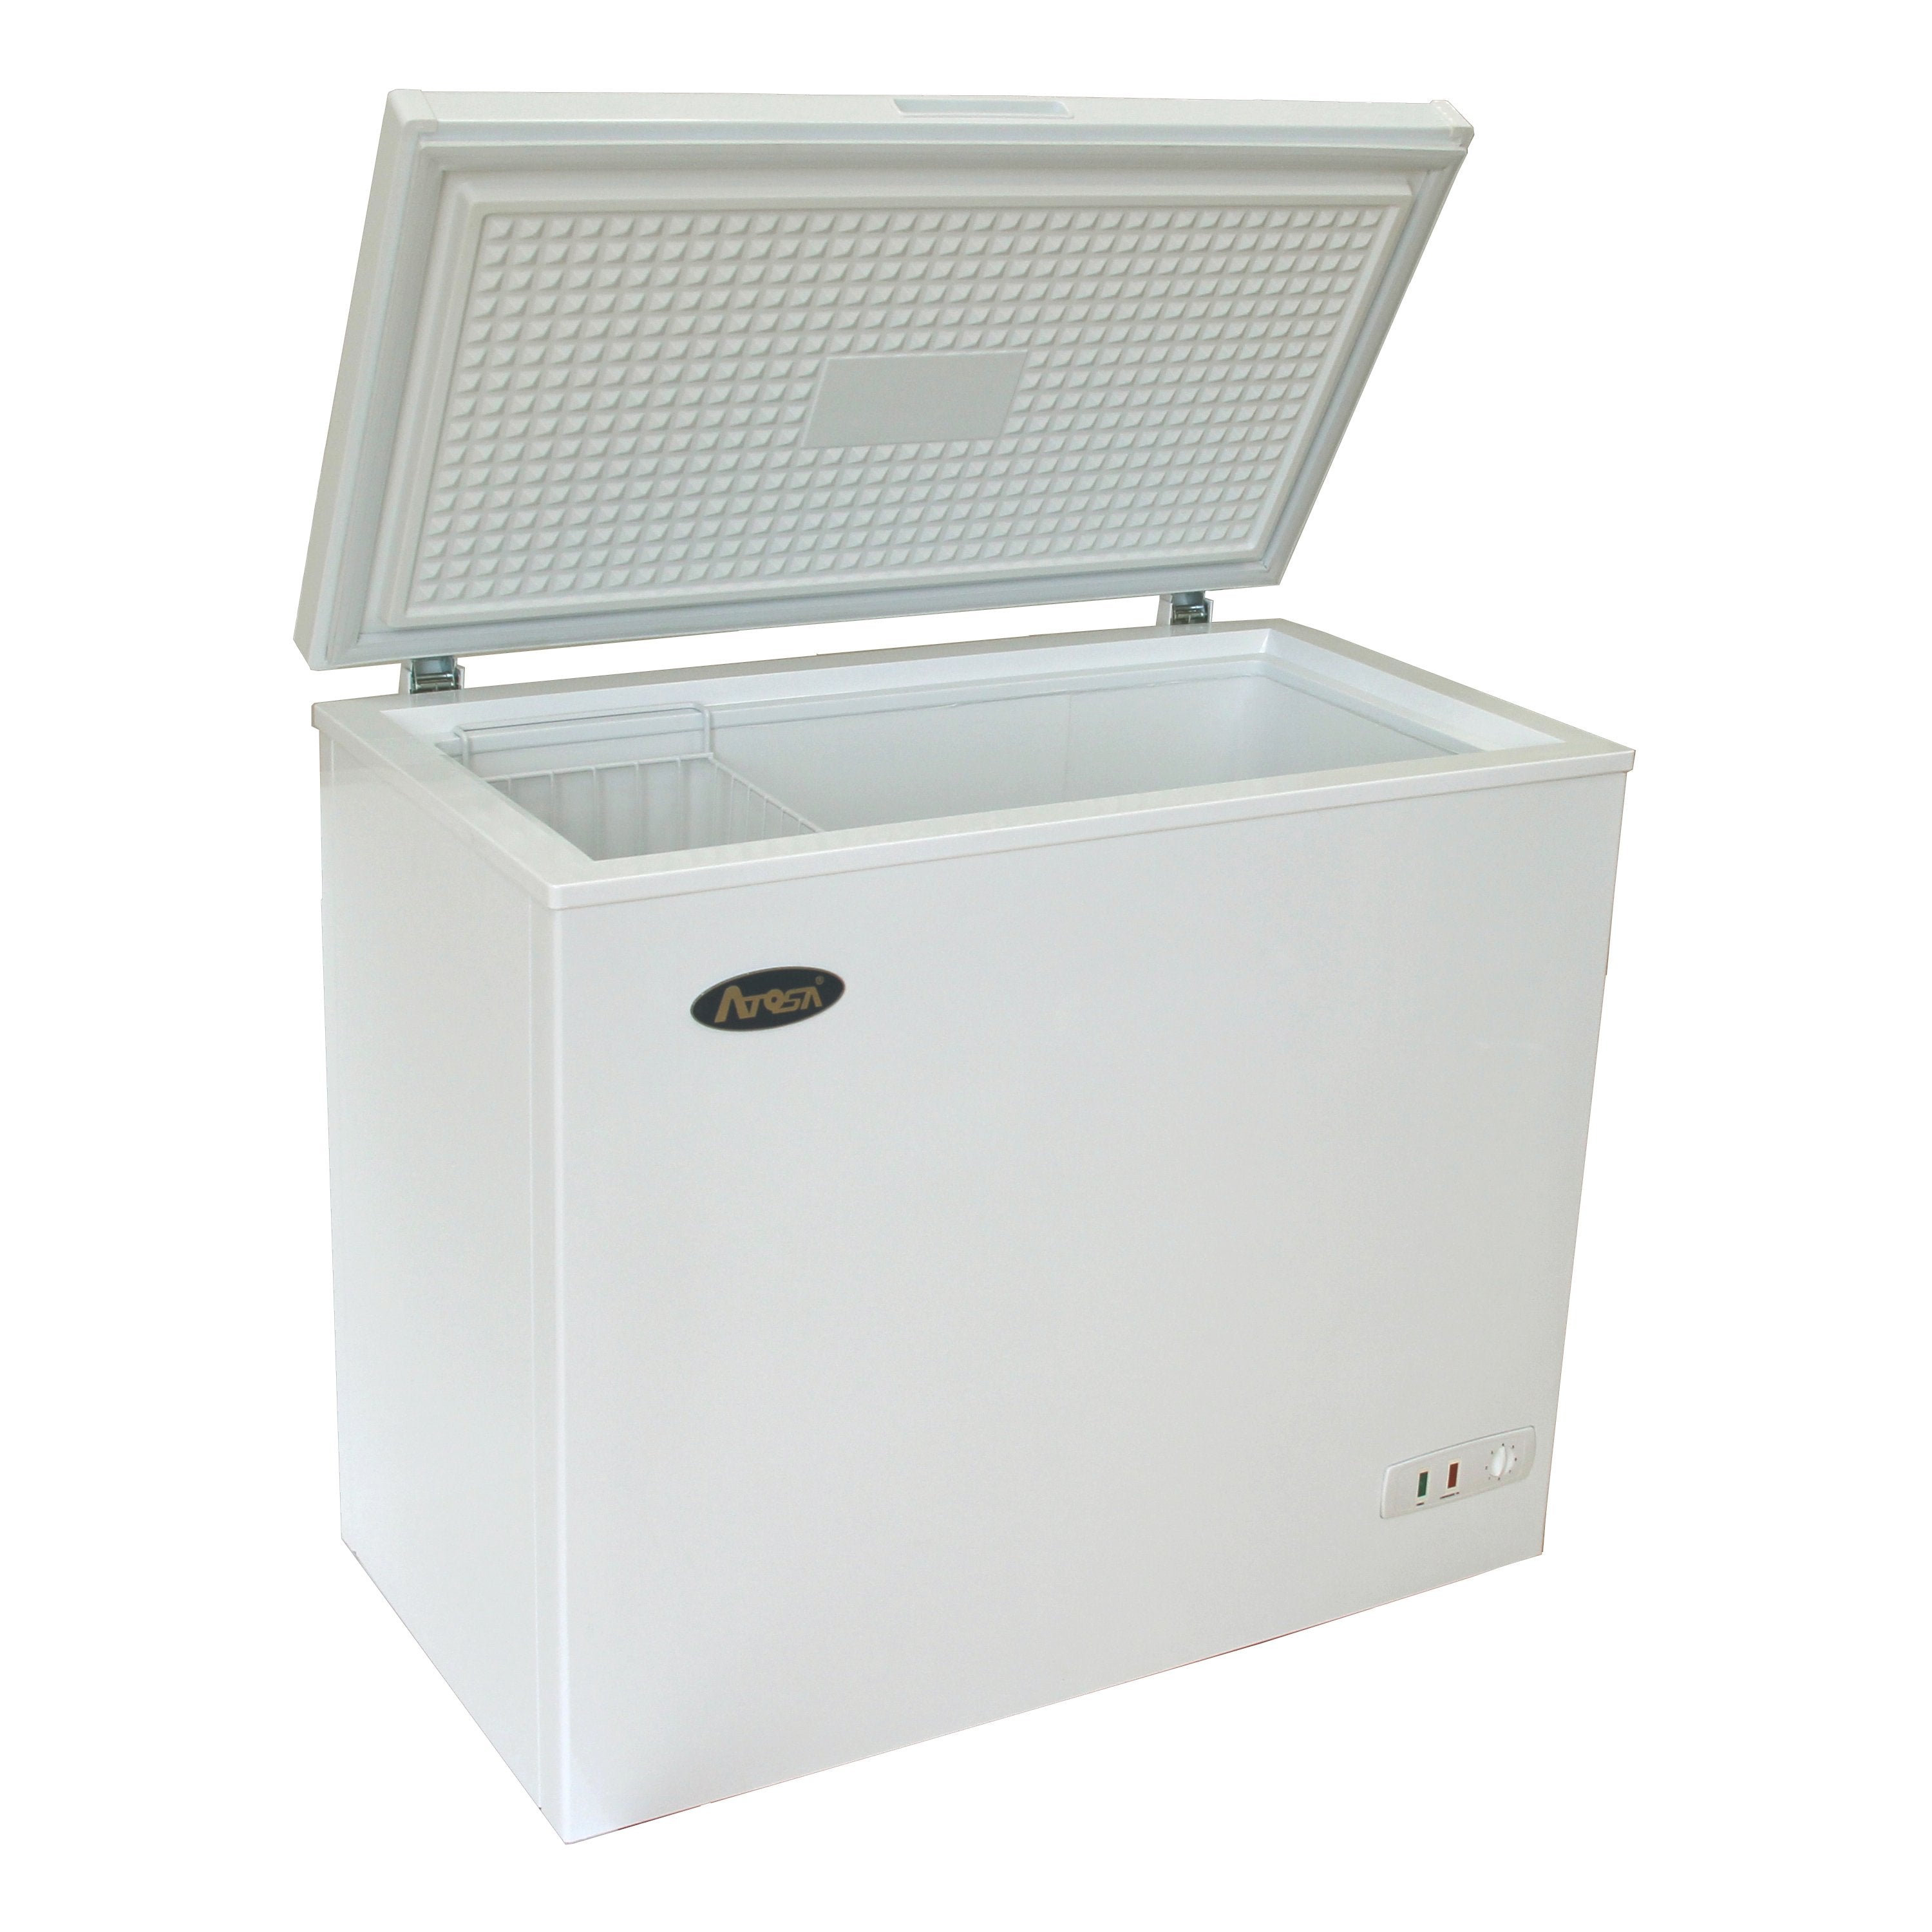 Atosa MWF9010GR Solid Top Chest Freezer-10 Cu.Ft